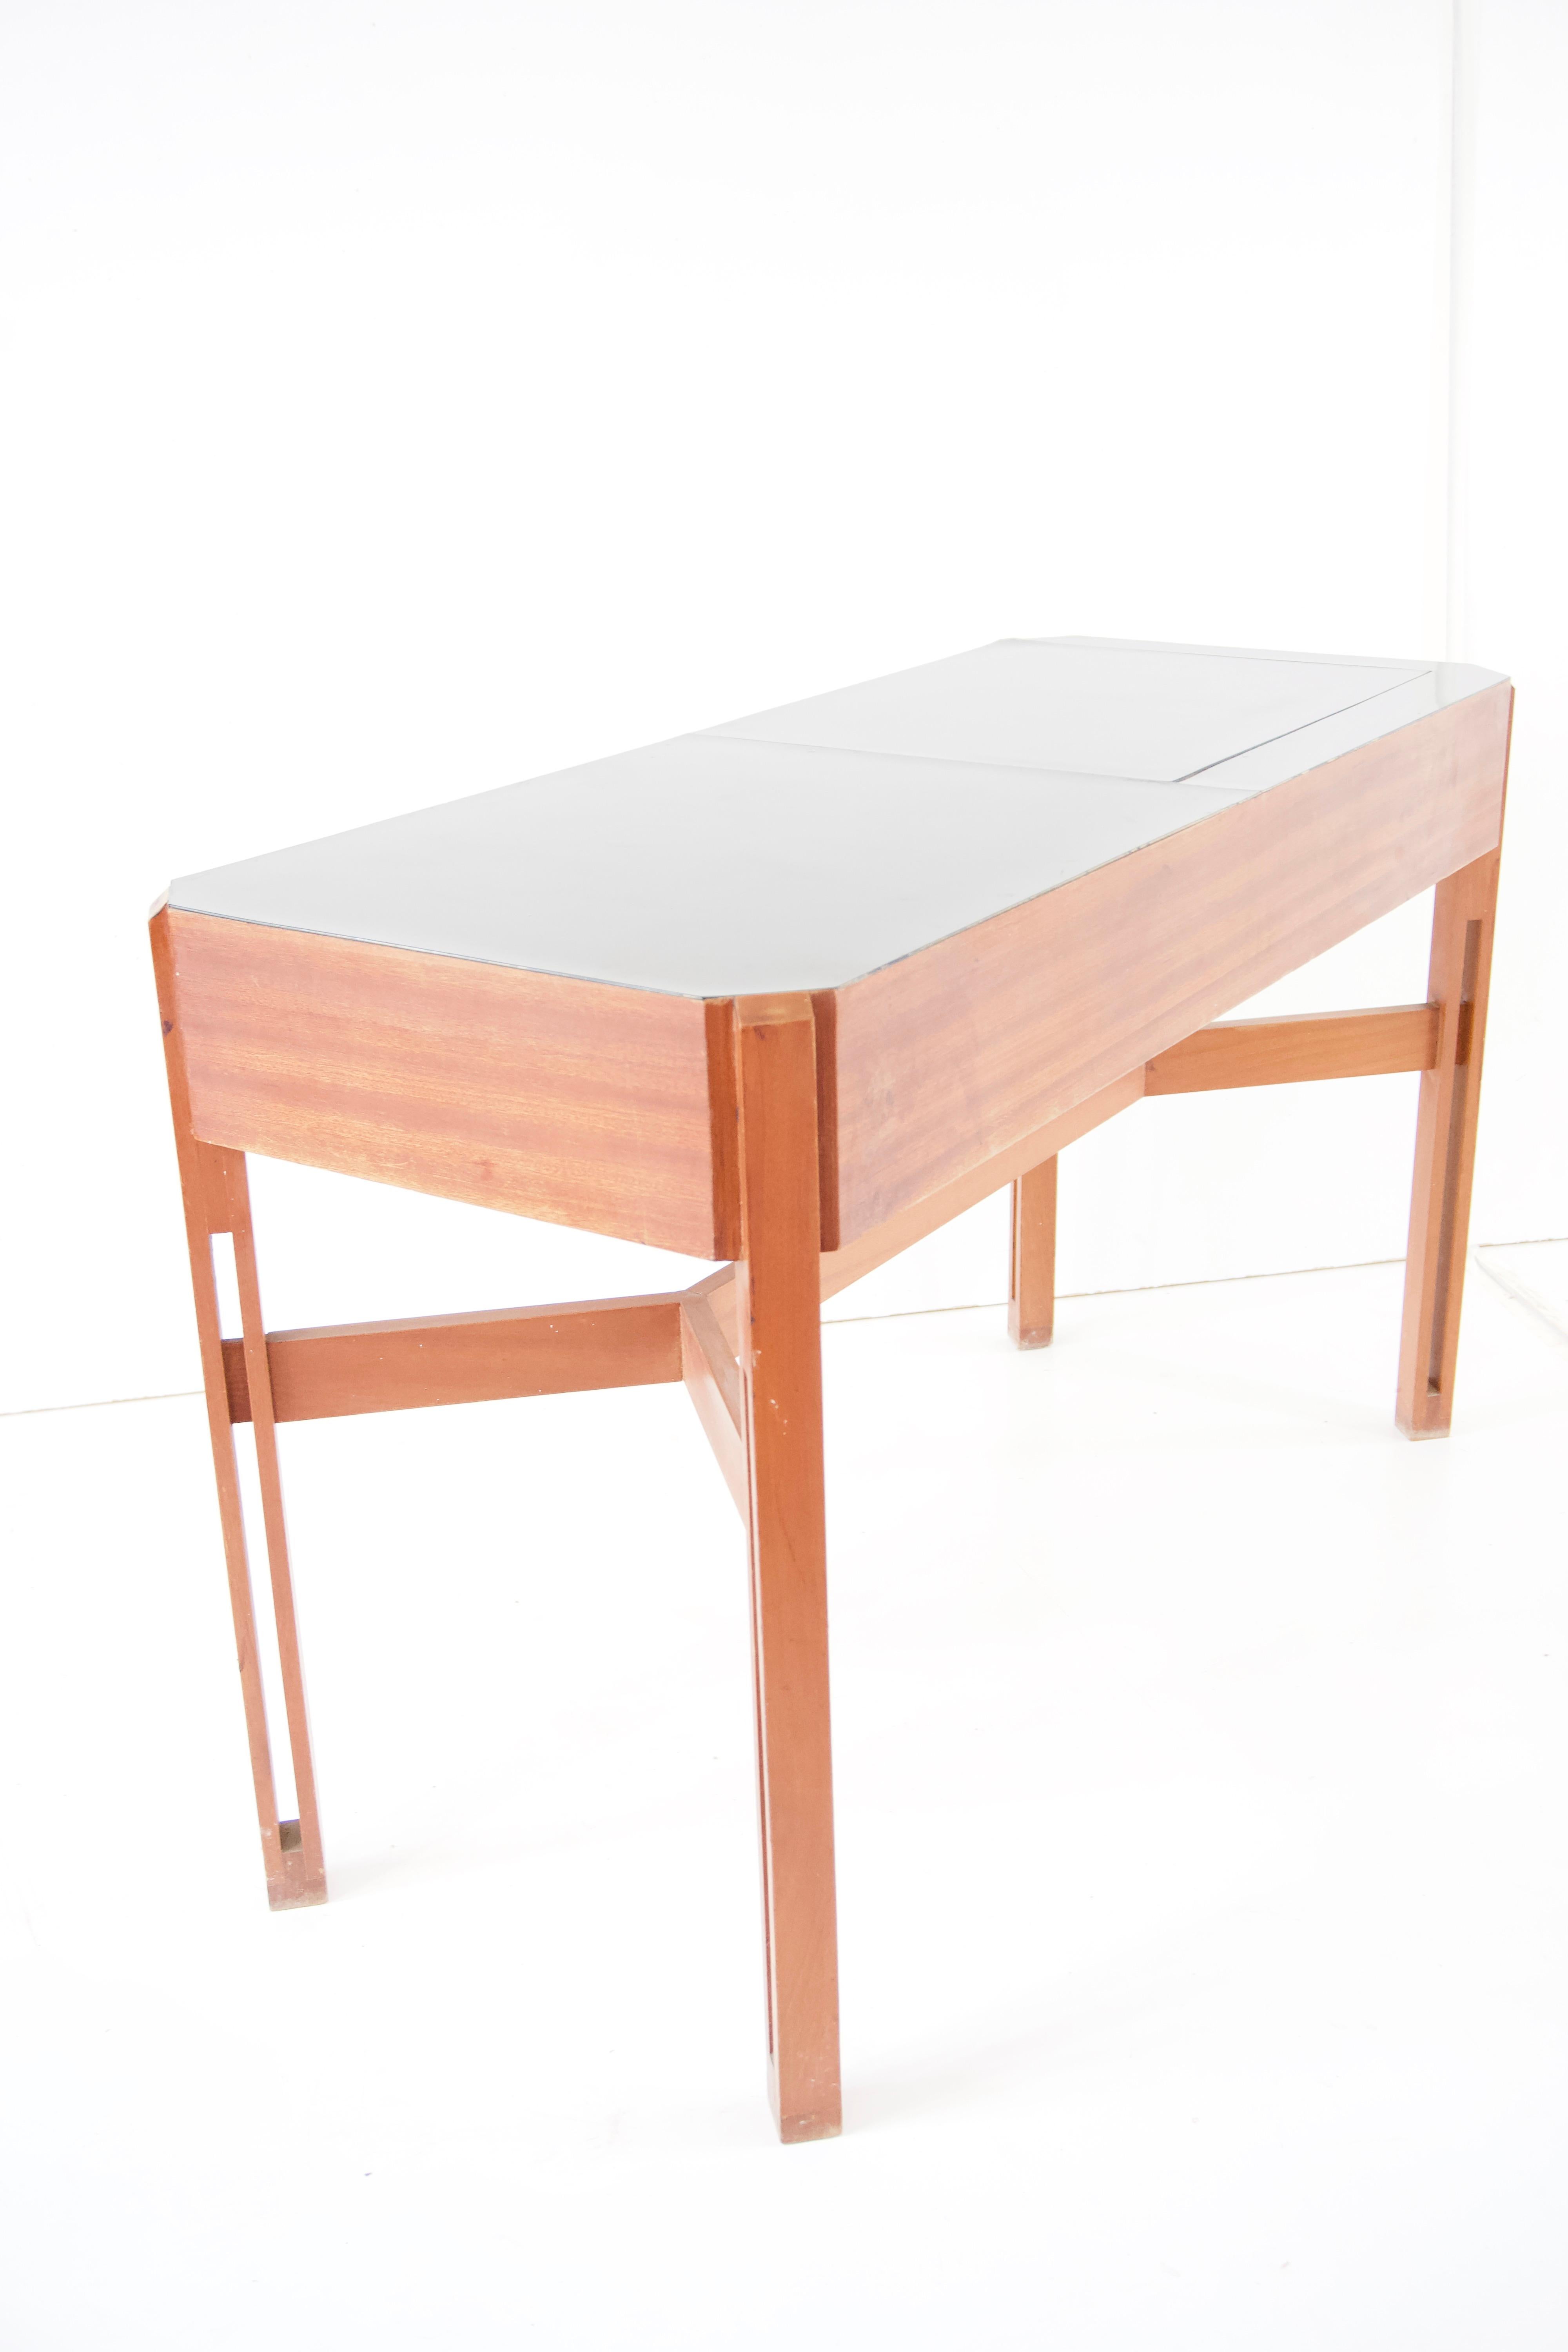 Ico Parisi Rare Large Wood and Laminate Desk with Mirror, Hotel Lorena, 1959.60 For Sale 4